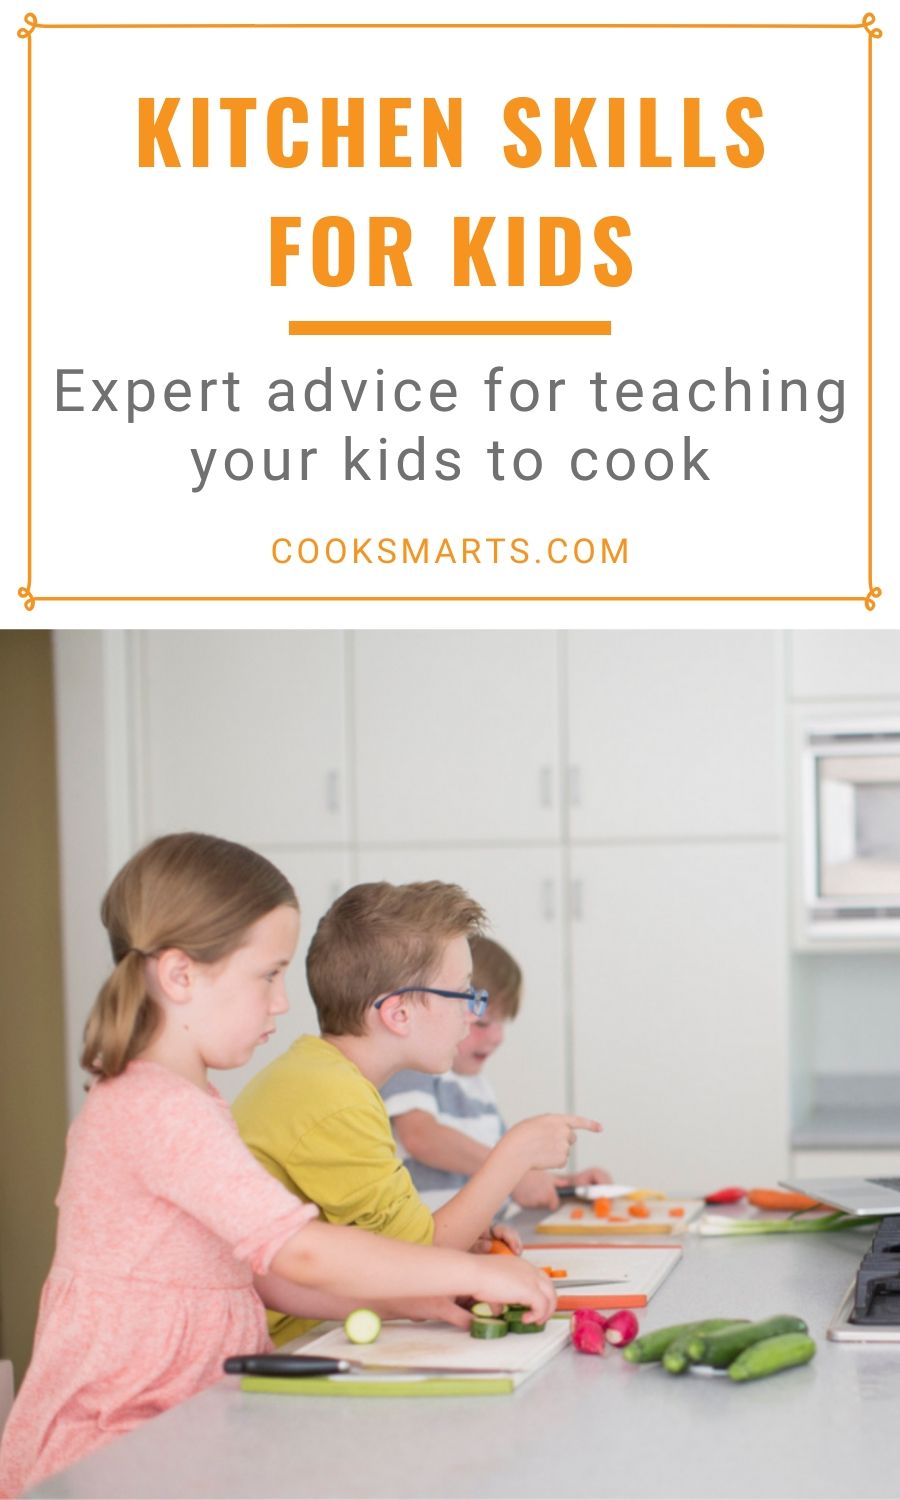 Kitchen Skills for Kids with Katie Kimball | In the Kitchen with Cook Smarts Podcast